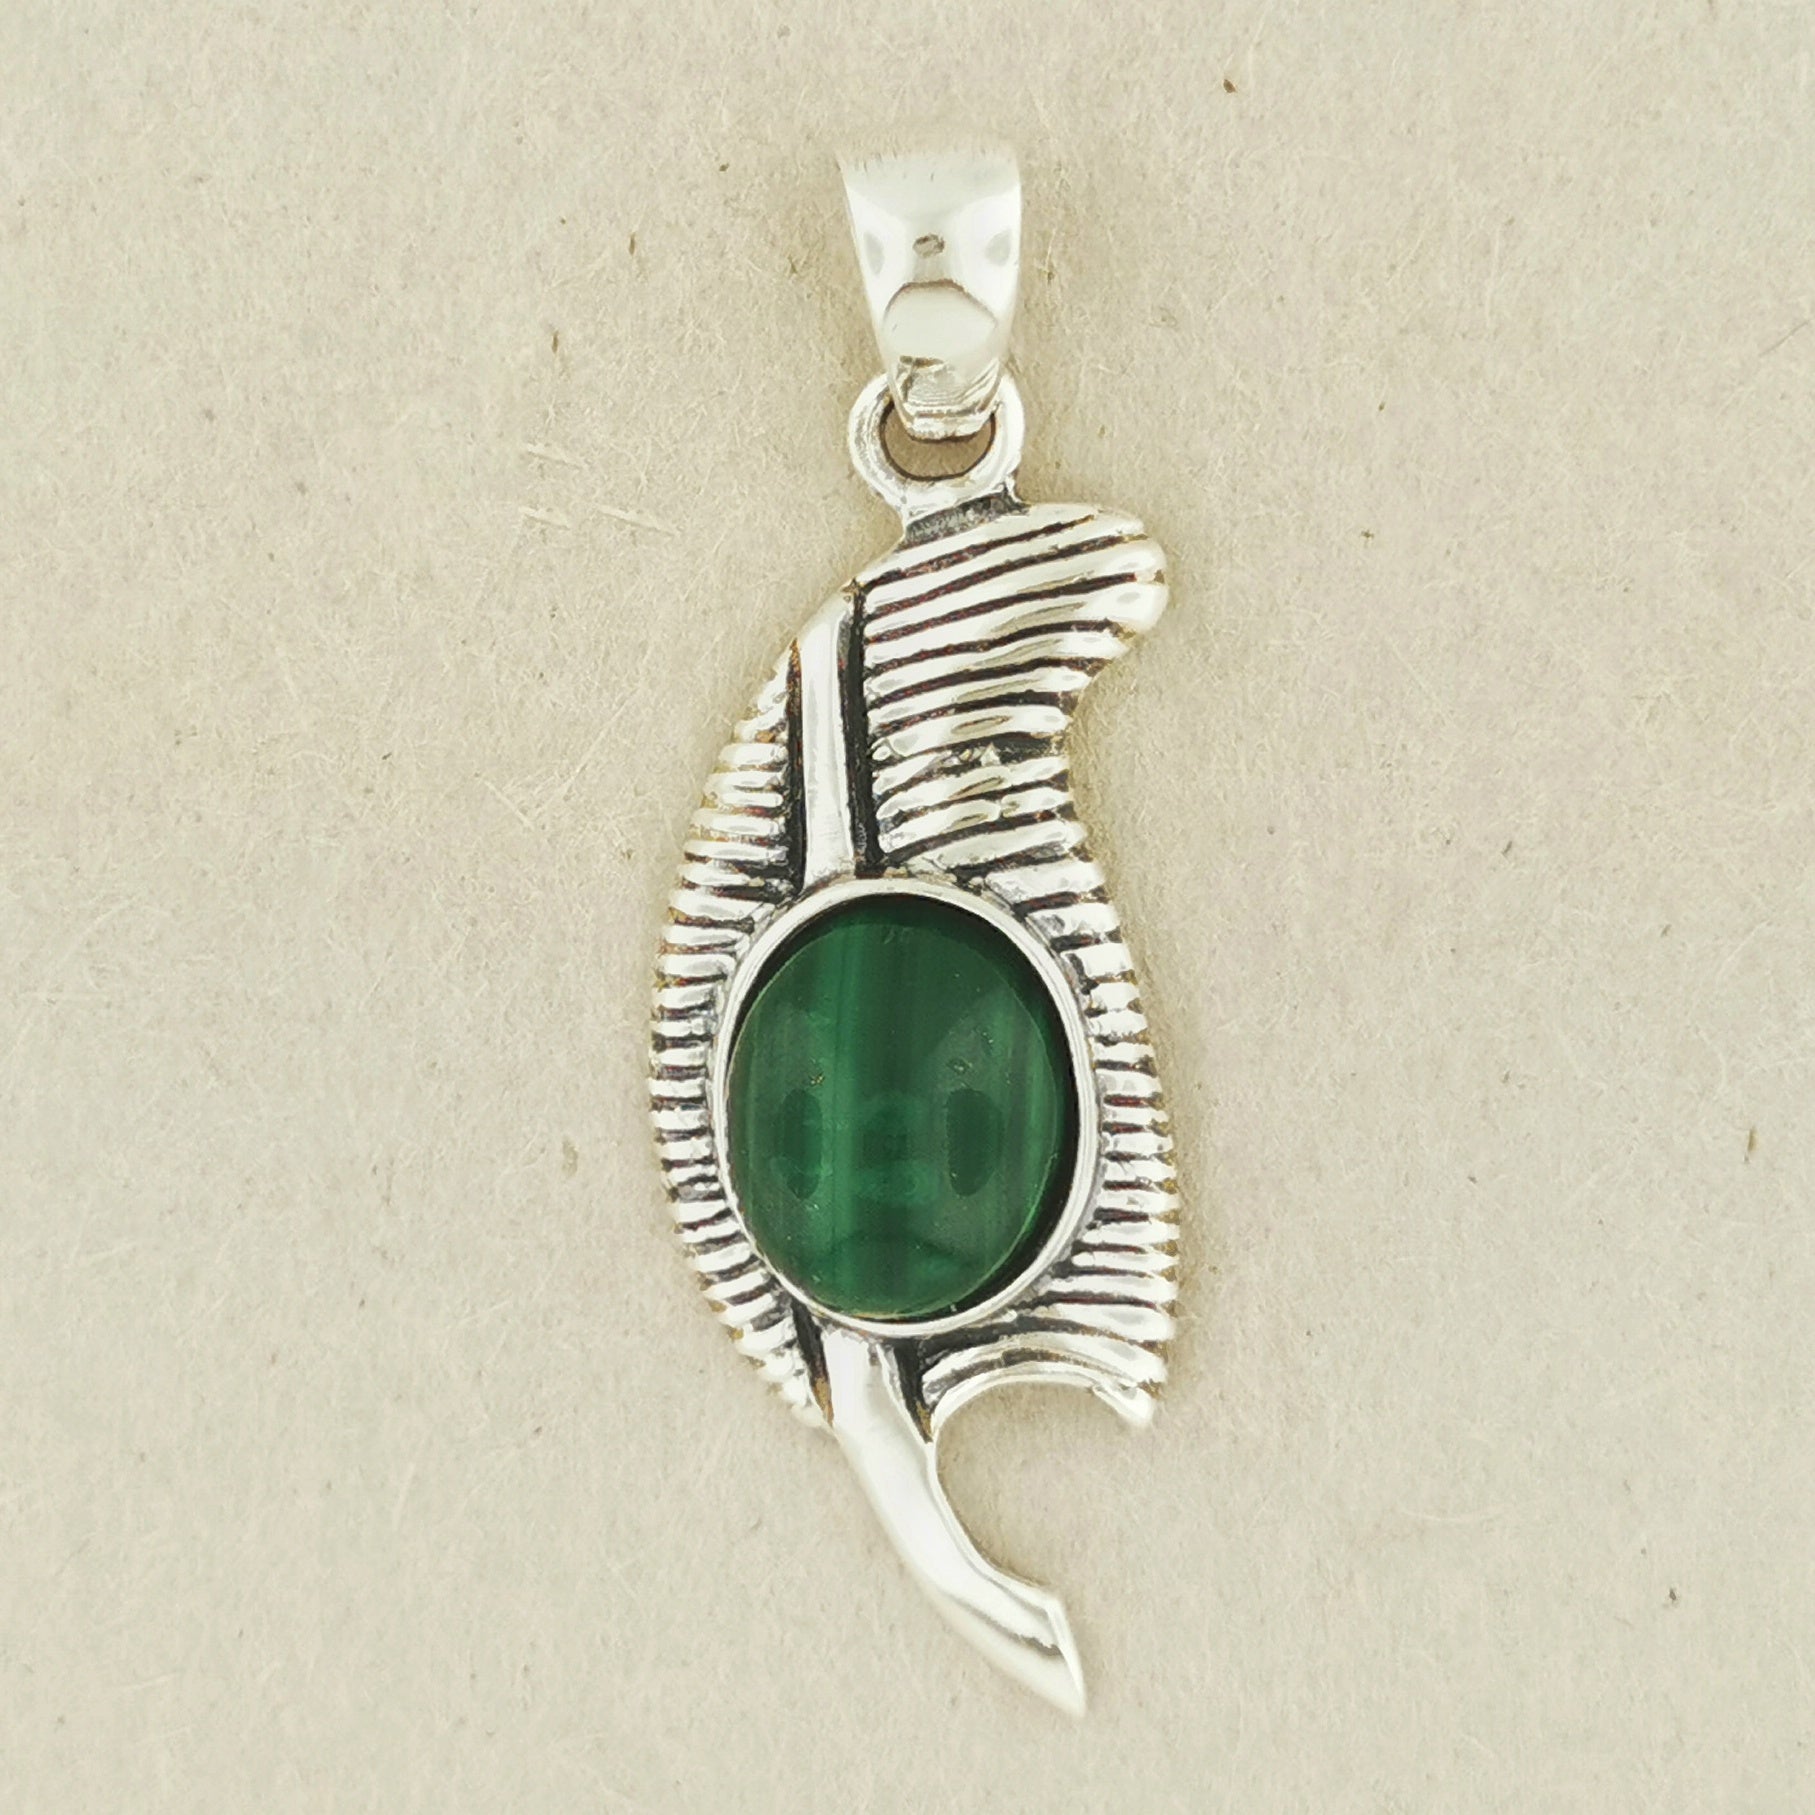 Feather of Ma'at Pendant in Sterling Silver with Malachite, Egyptian Feather Pendant, Egyptian Goddess Pendant, Goddess of Truth Pendant, Silver Egyptian Feather Pendant, Silver Ma’at Pendant, Egyptian Silver Pendant, Silver Gemstone Egyptian Feather Pendant